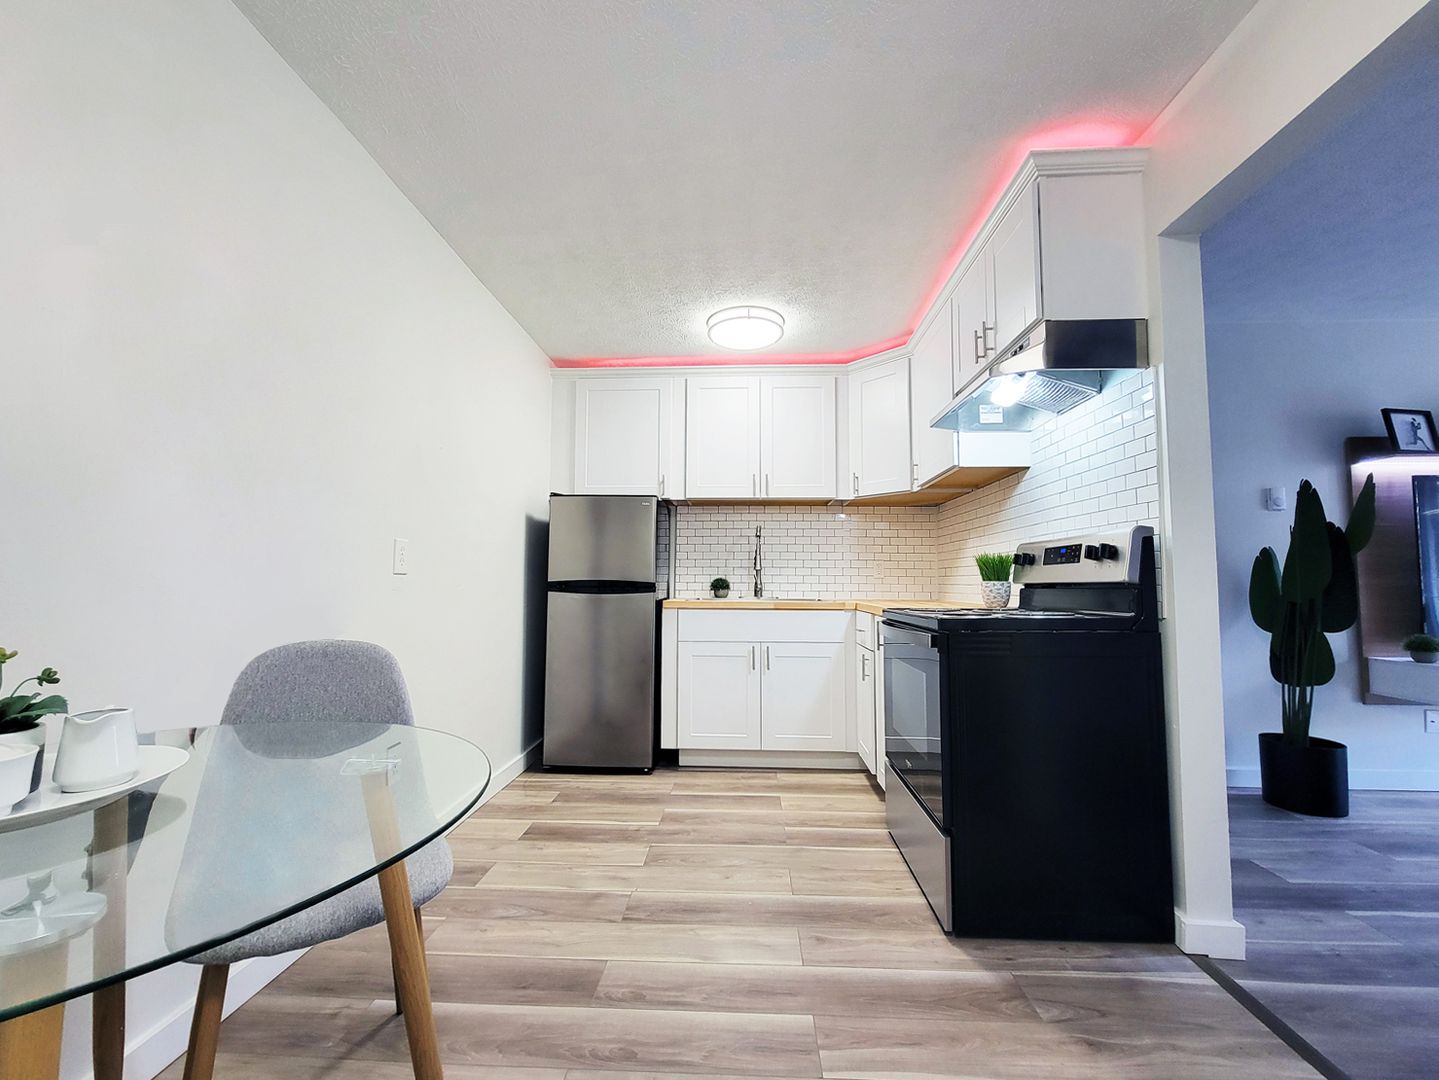 2 Bedroom Apartments for Rent | Newly Renovated Image